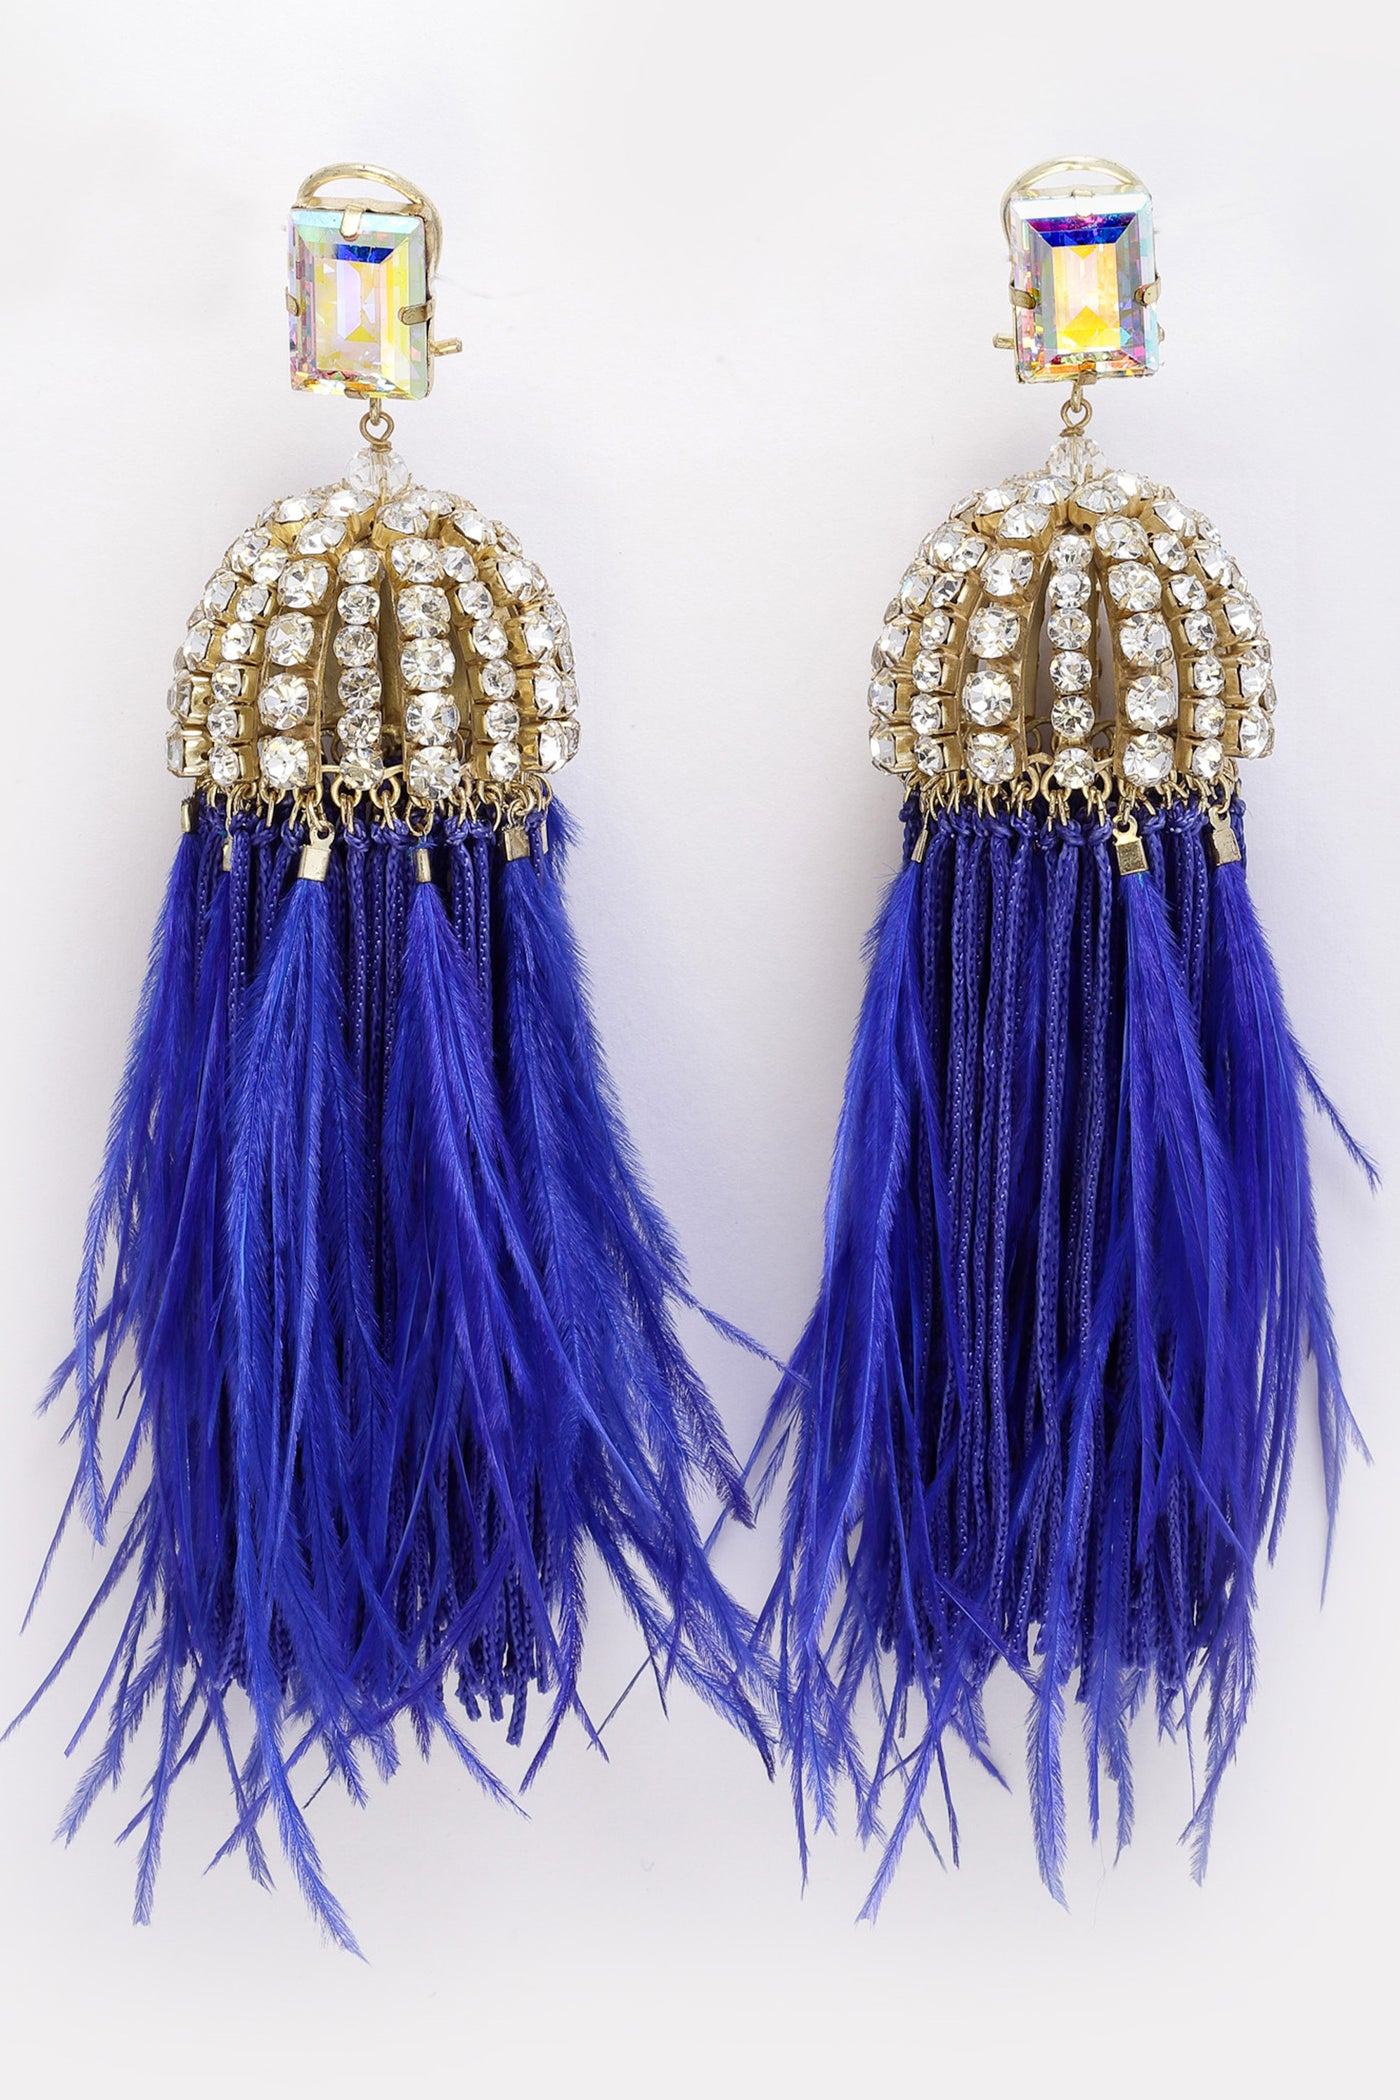 Bijoux by priya chandna Dome Shaped Crystal Earrings royal blue and crystal fashion imitation jewellery  indian designer wear online shopping melange singapore